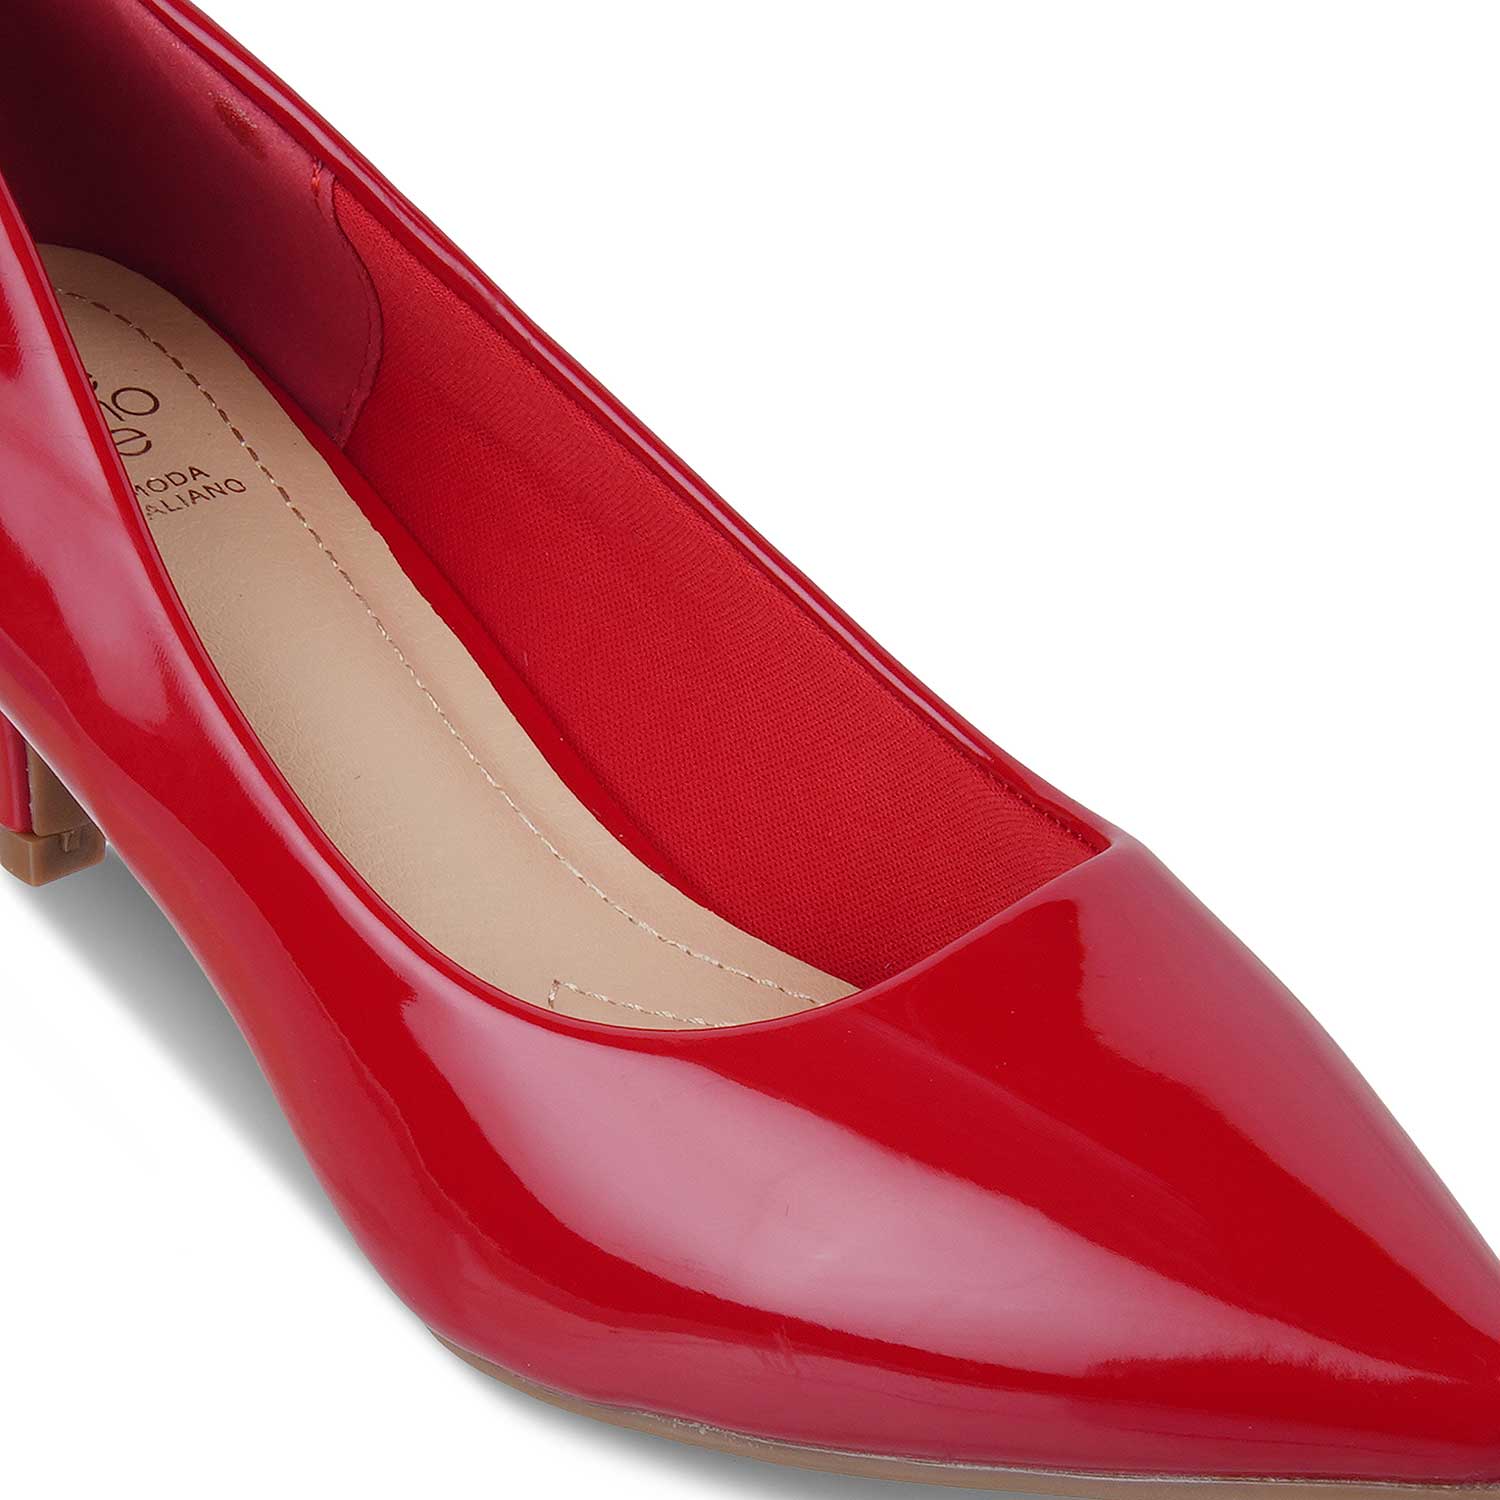 The Jerse Red Women's Dress Pumps Tresmode